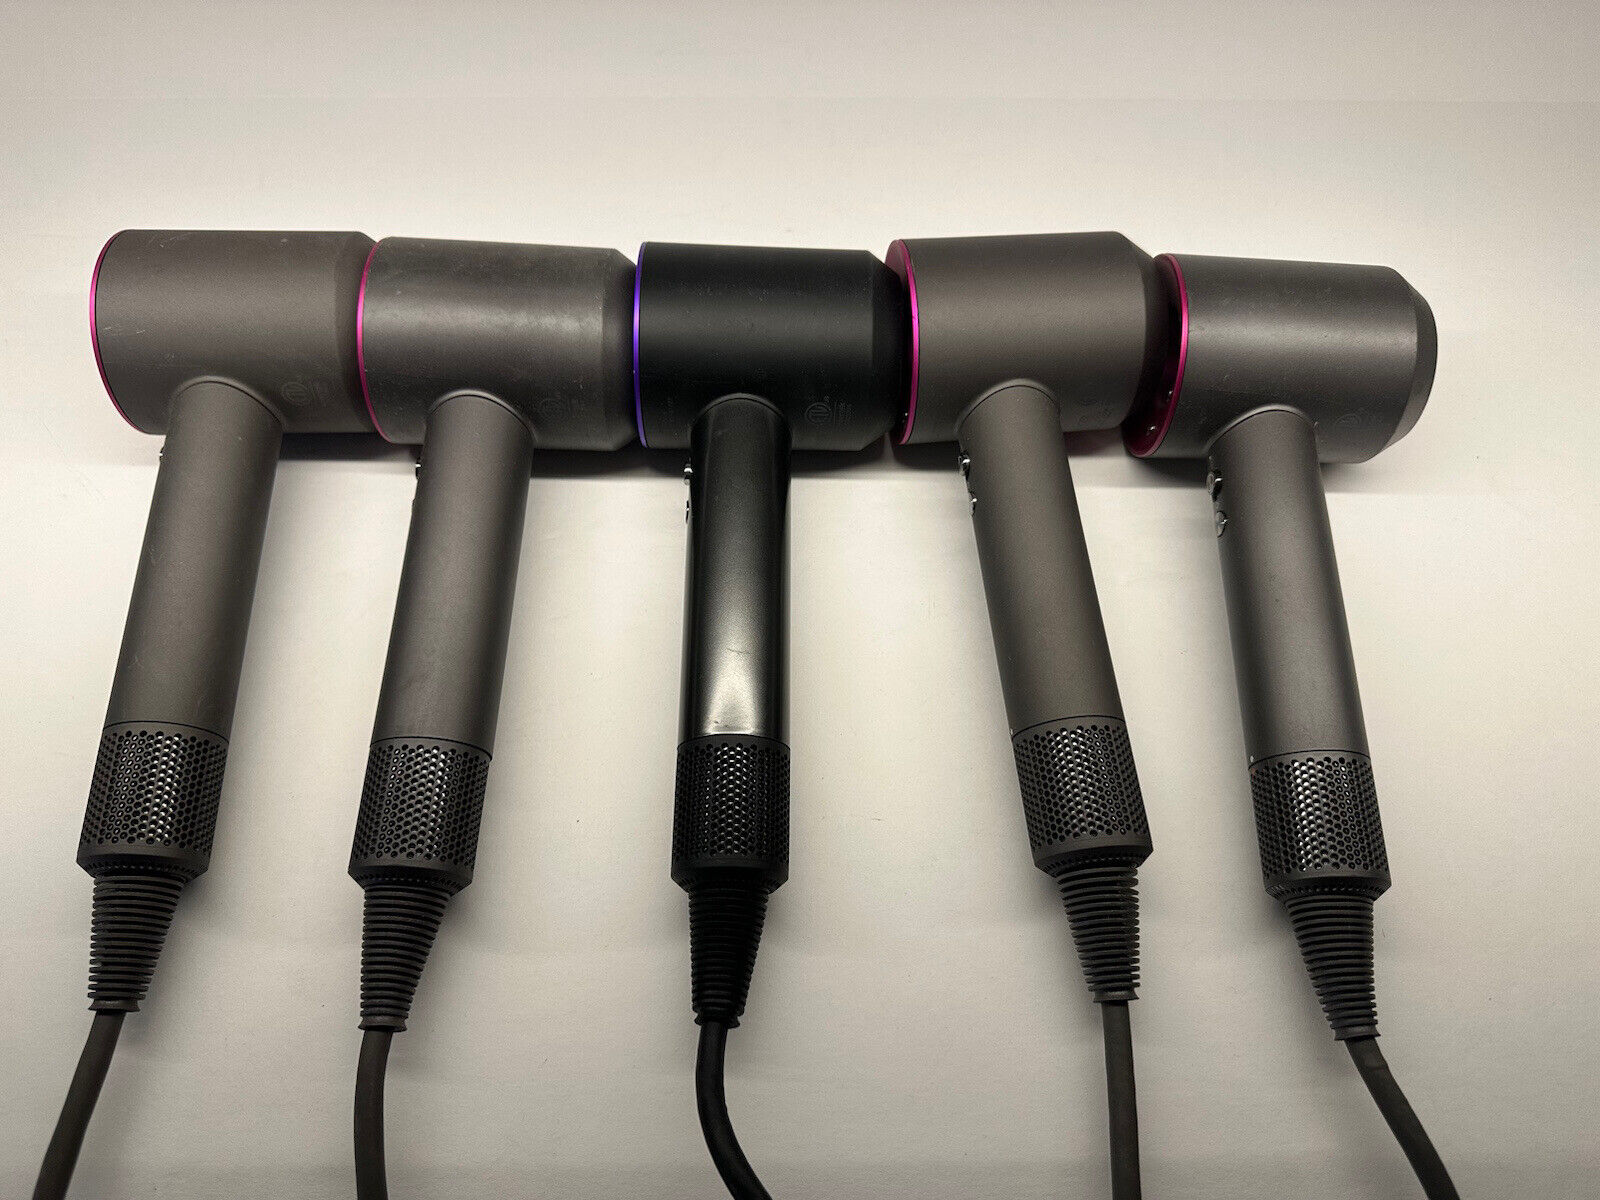 How To Spot A Fake Dyson Hair Dryer